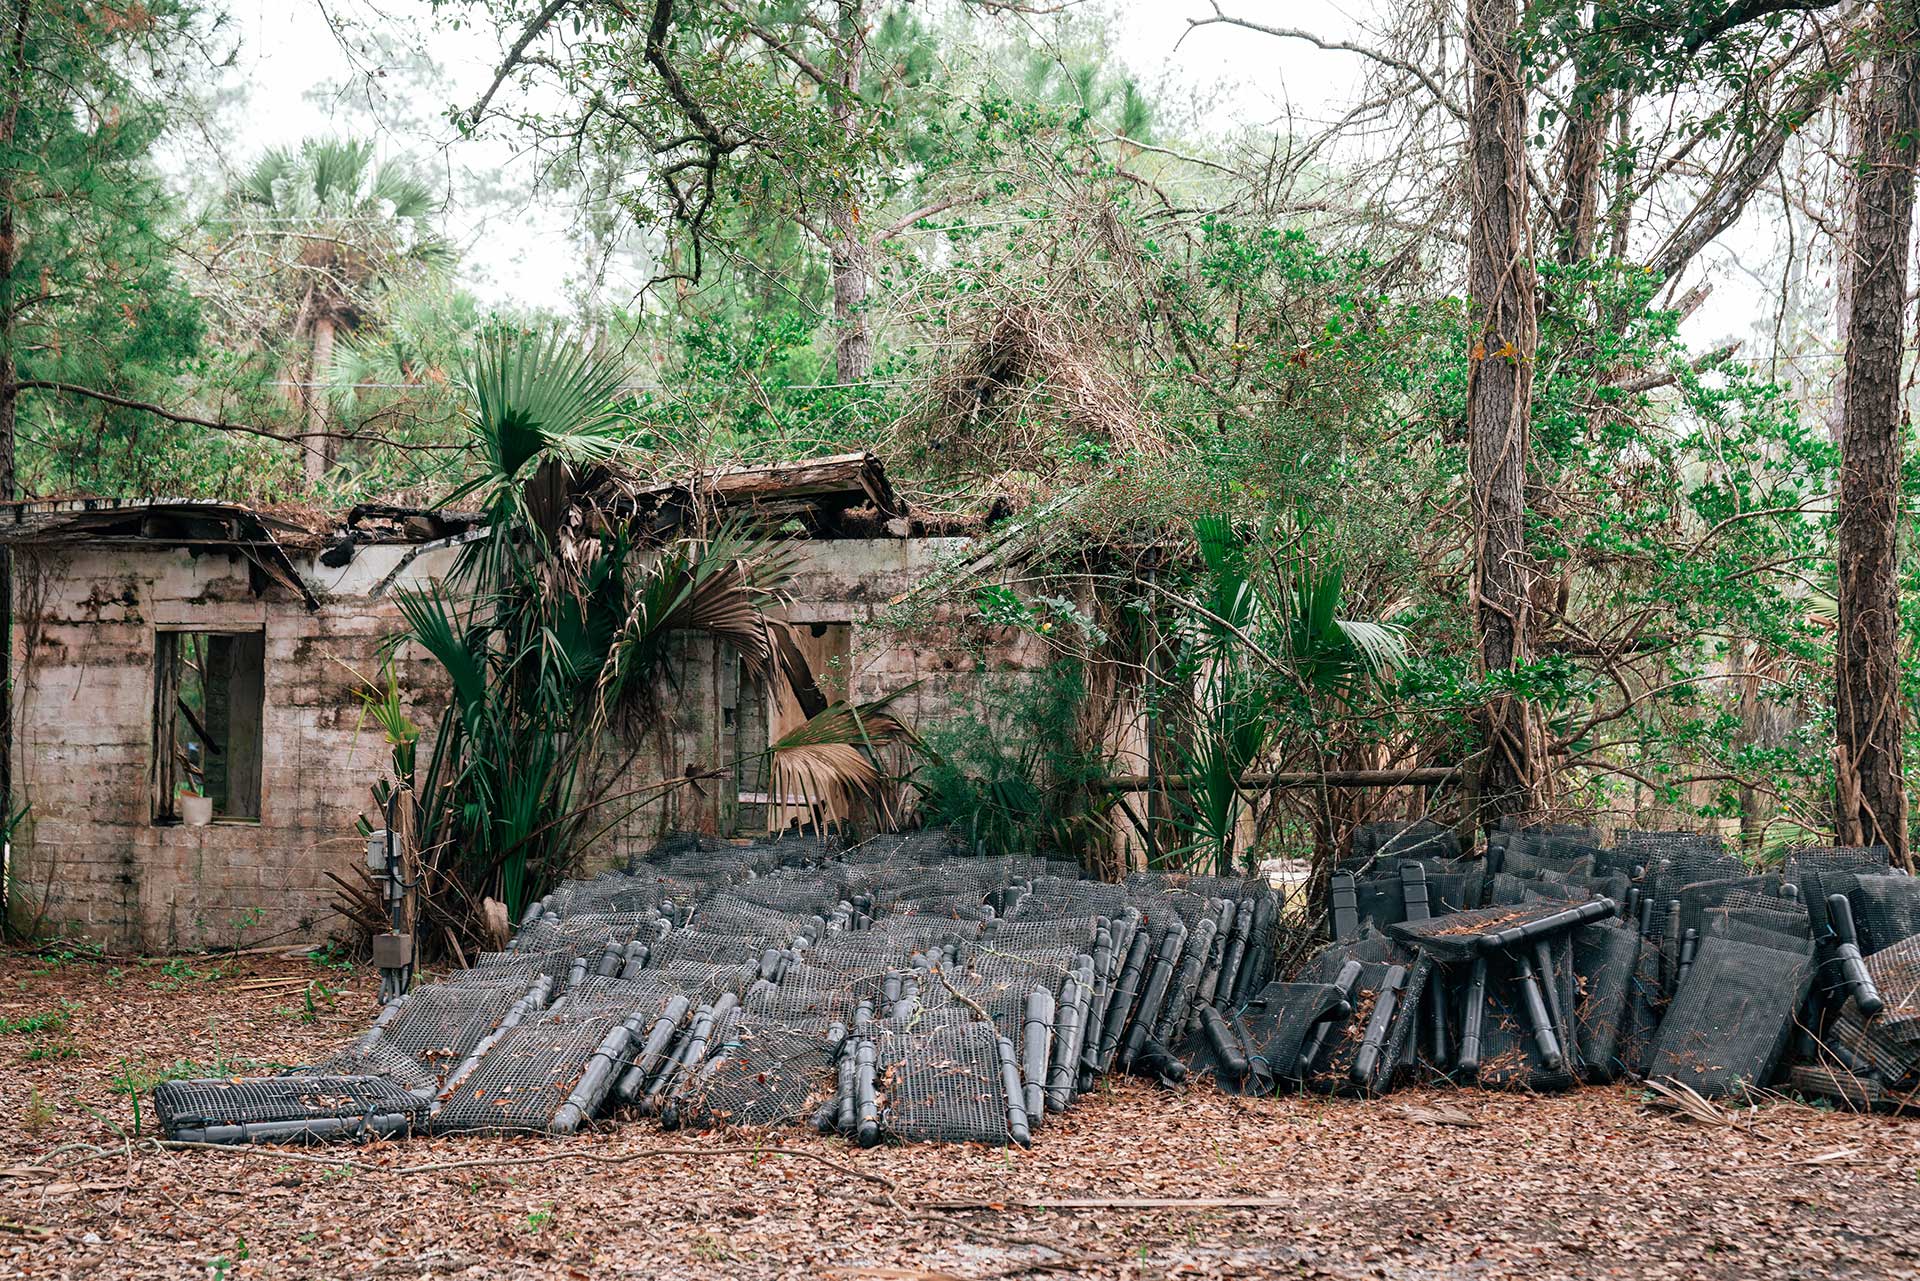 Bags for oysters sit next to an old building that was part of the Spring Creek Restaurant and Lodge property. The Spring Creek Restaurant had been open for over 40 years, since the late 1970s, but the owners decided not to reopen after sustaining serious damage during Hurricane Michael in 2018. Jody and Dewey now own the property now, but there are still plenty of reminders of the past. Jody says part of the appeal was that it is truly Old Florida, something that won’t be around for forever.